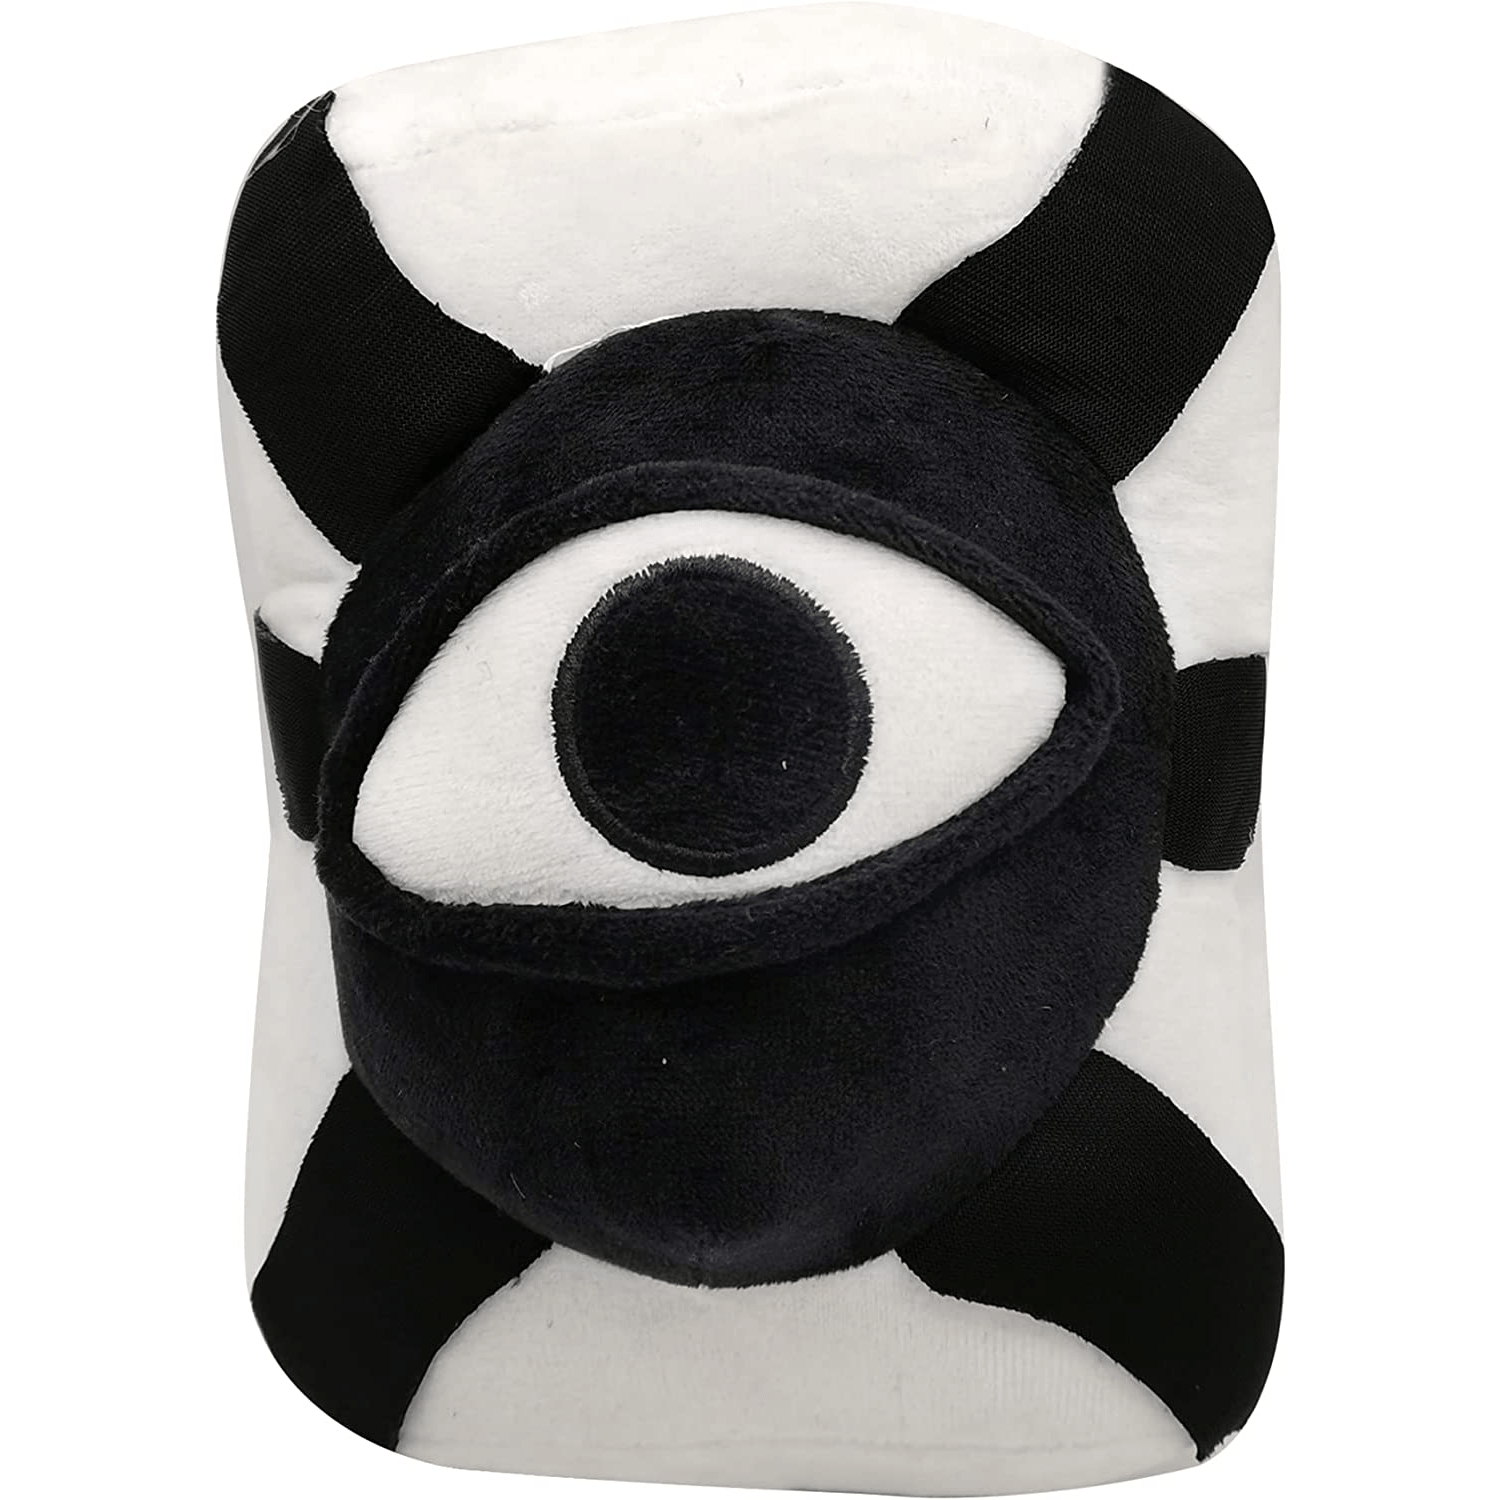 Doors Plush Toys, Monster Horror Game Plush, Stuffed Animals, Gifts for  Game Fans Children and Adults, Christmas Birthday Party Gift 